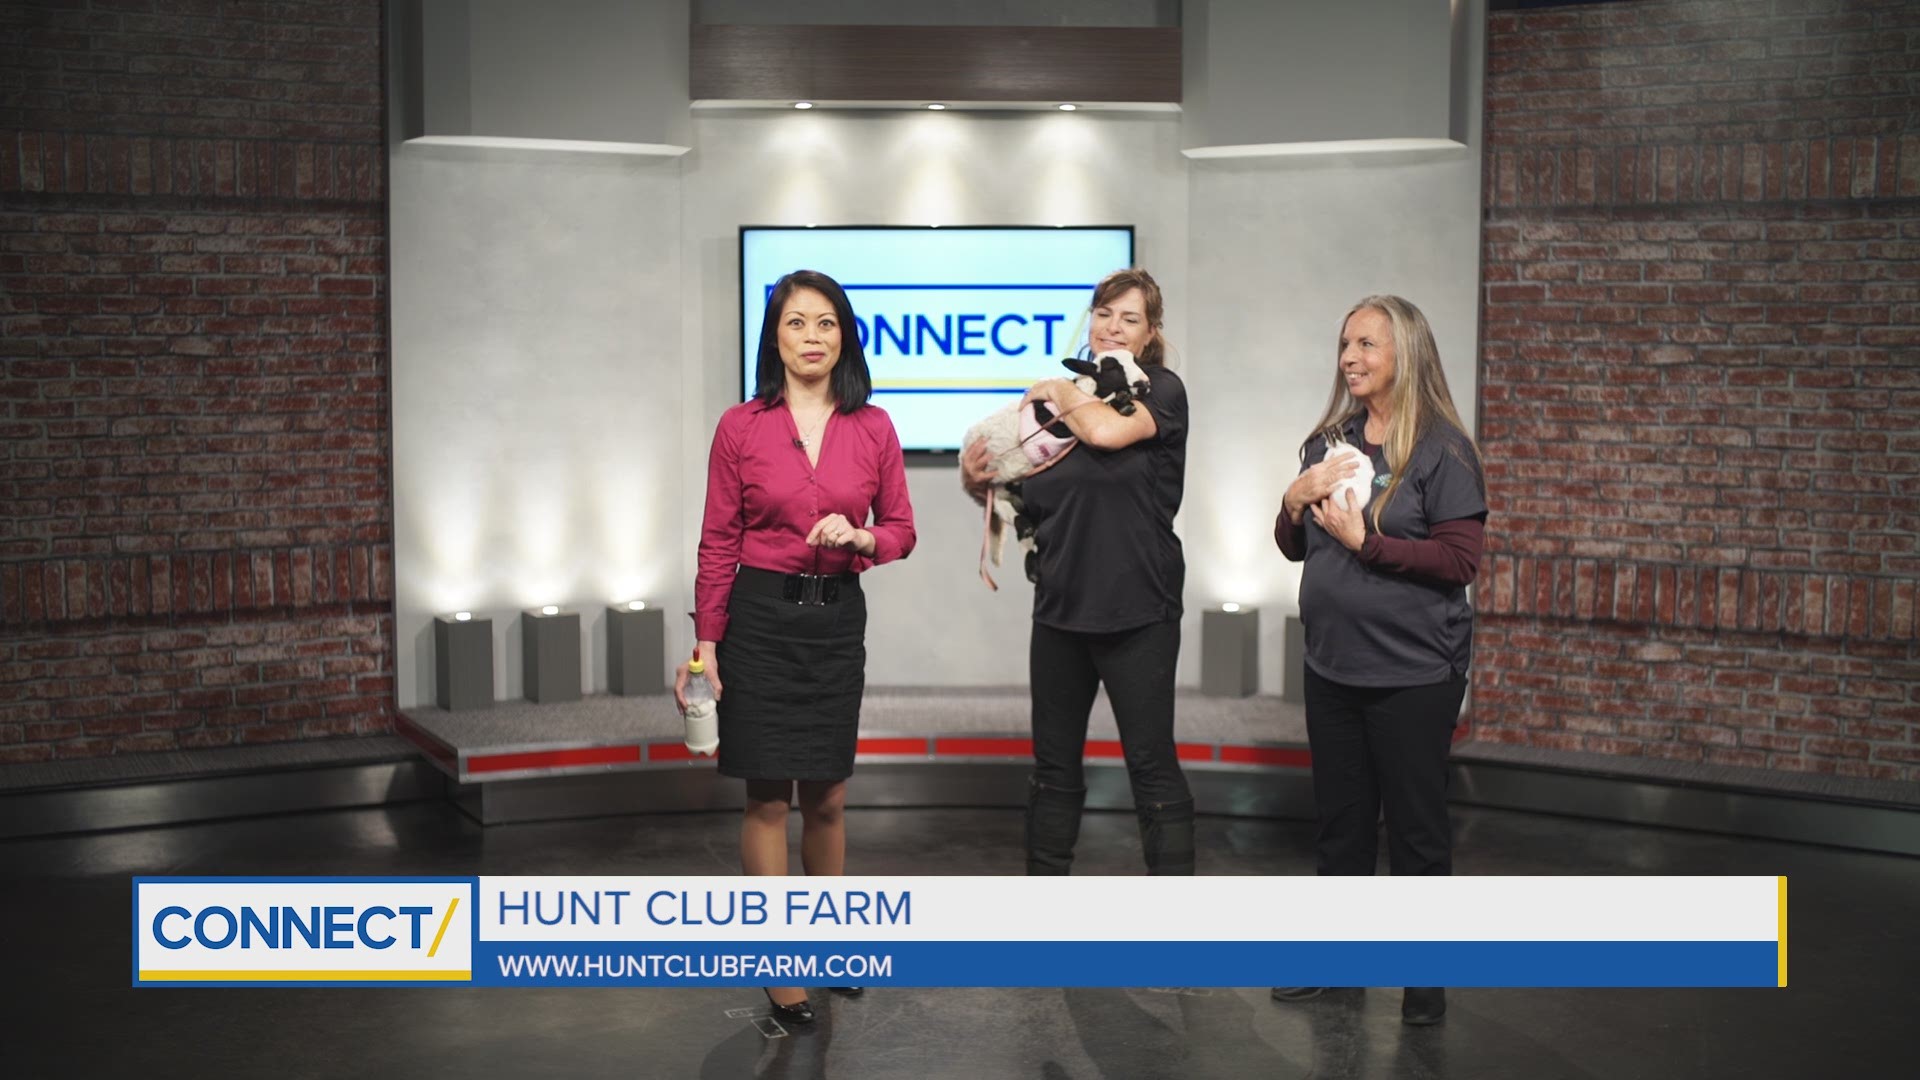 Hunt Club Farm stopped by to tell us about their summer camp program. We also got a little taste of what children can look forward to while at camp.